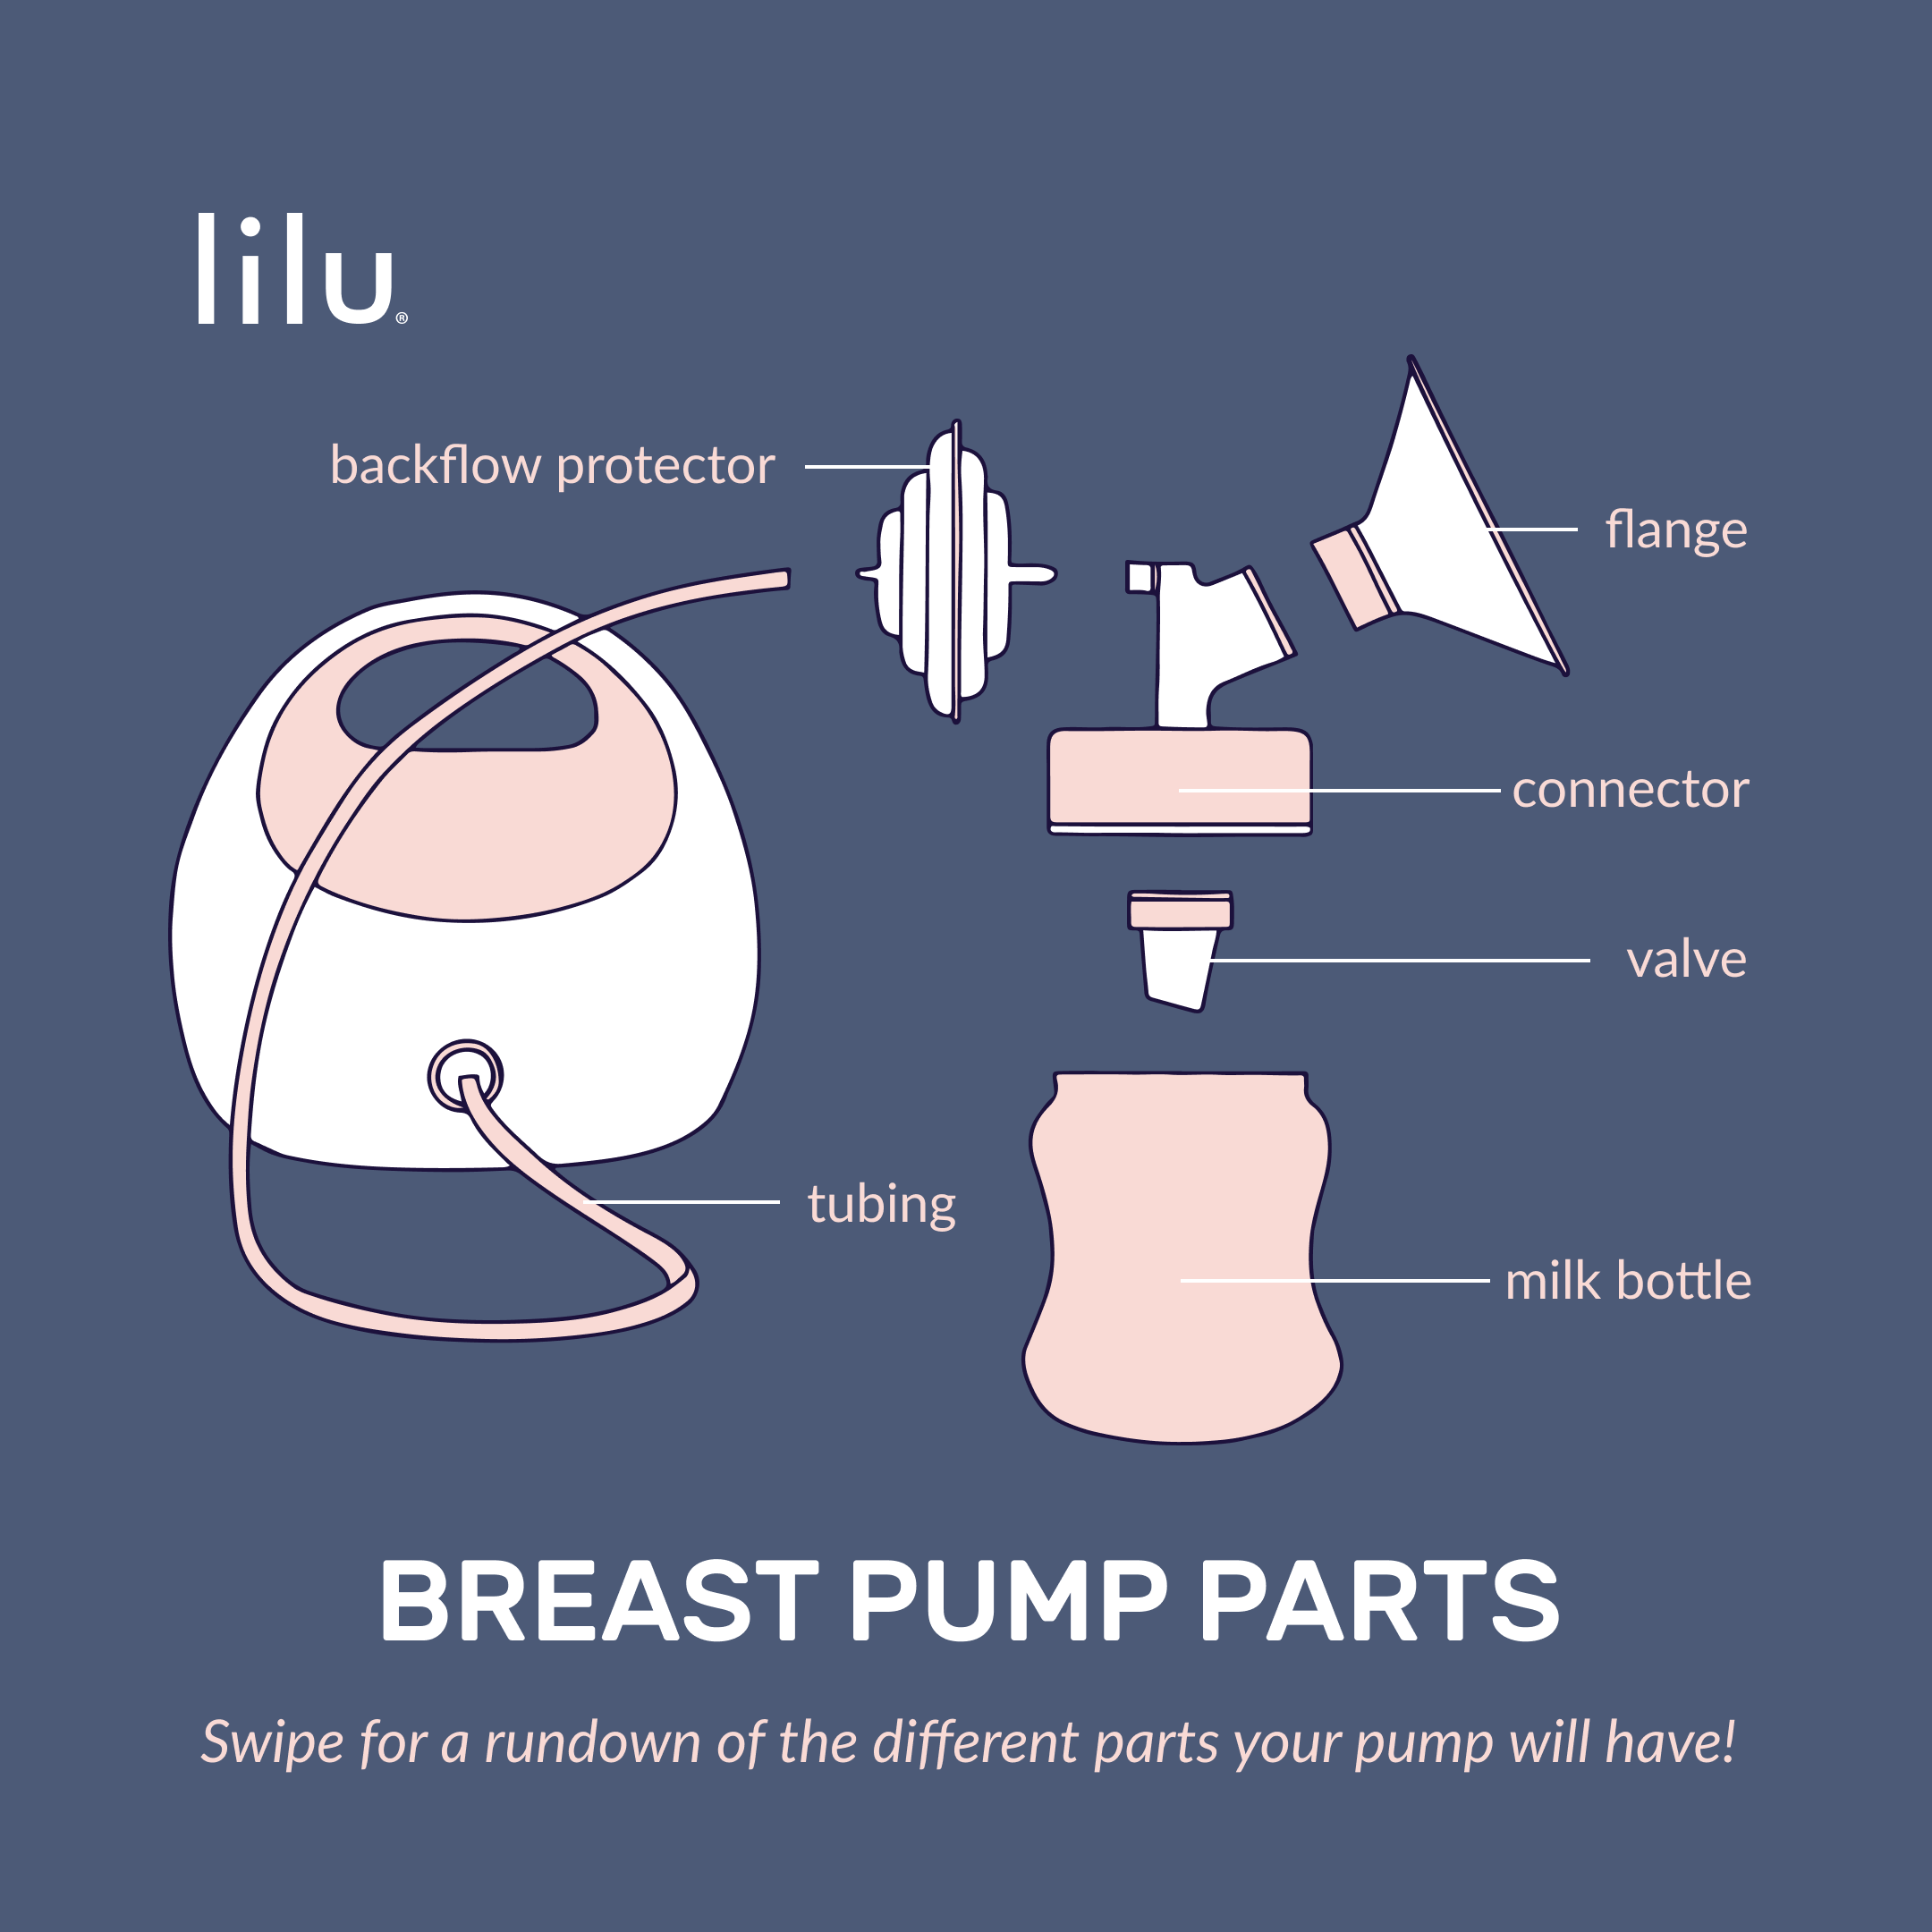 8 Tips for Washing Baby Bottles and Breast Pump Parts